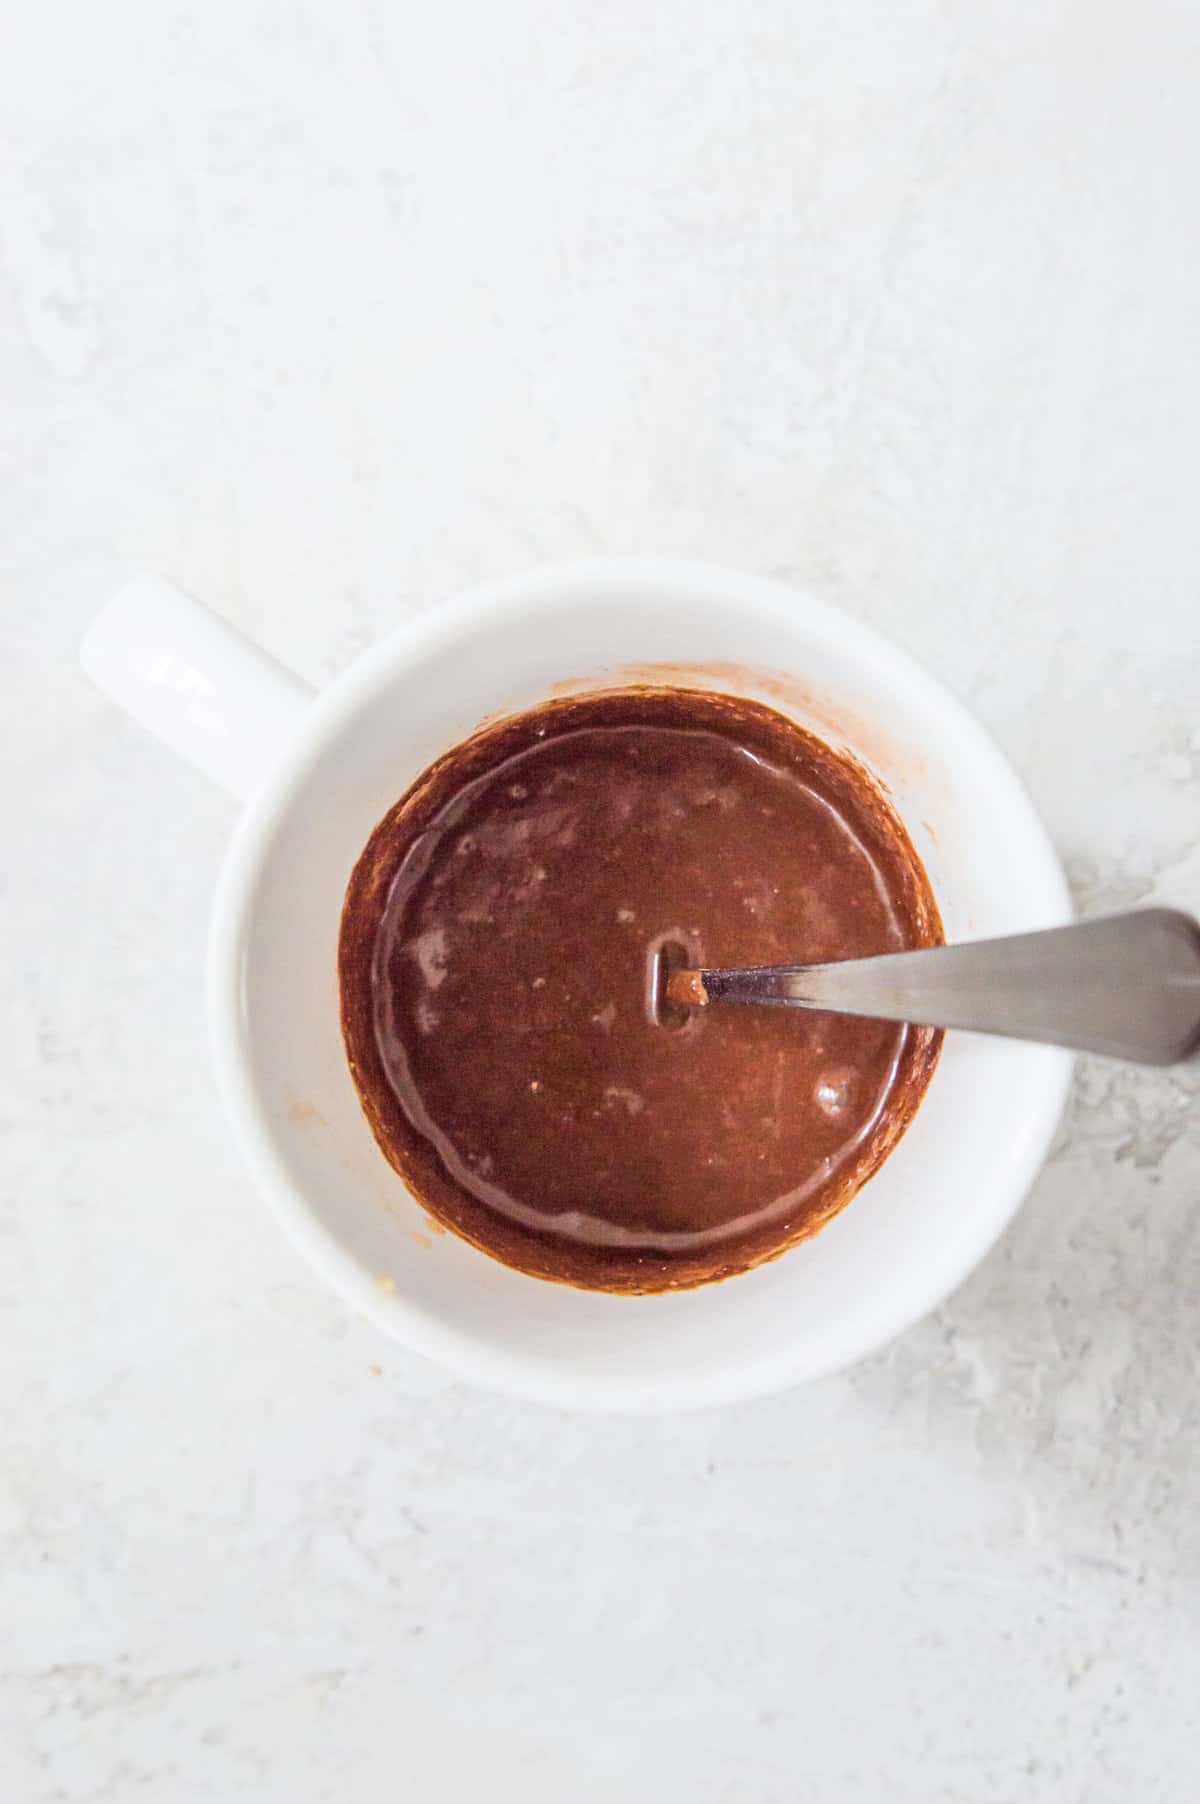 A mug with chocolate cake batter in it and a spoon in the batter.